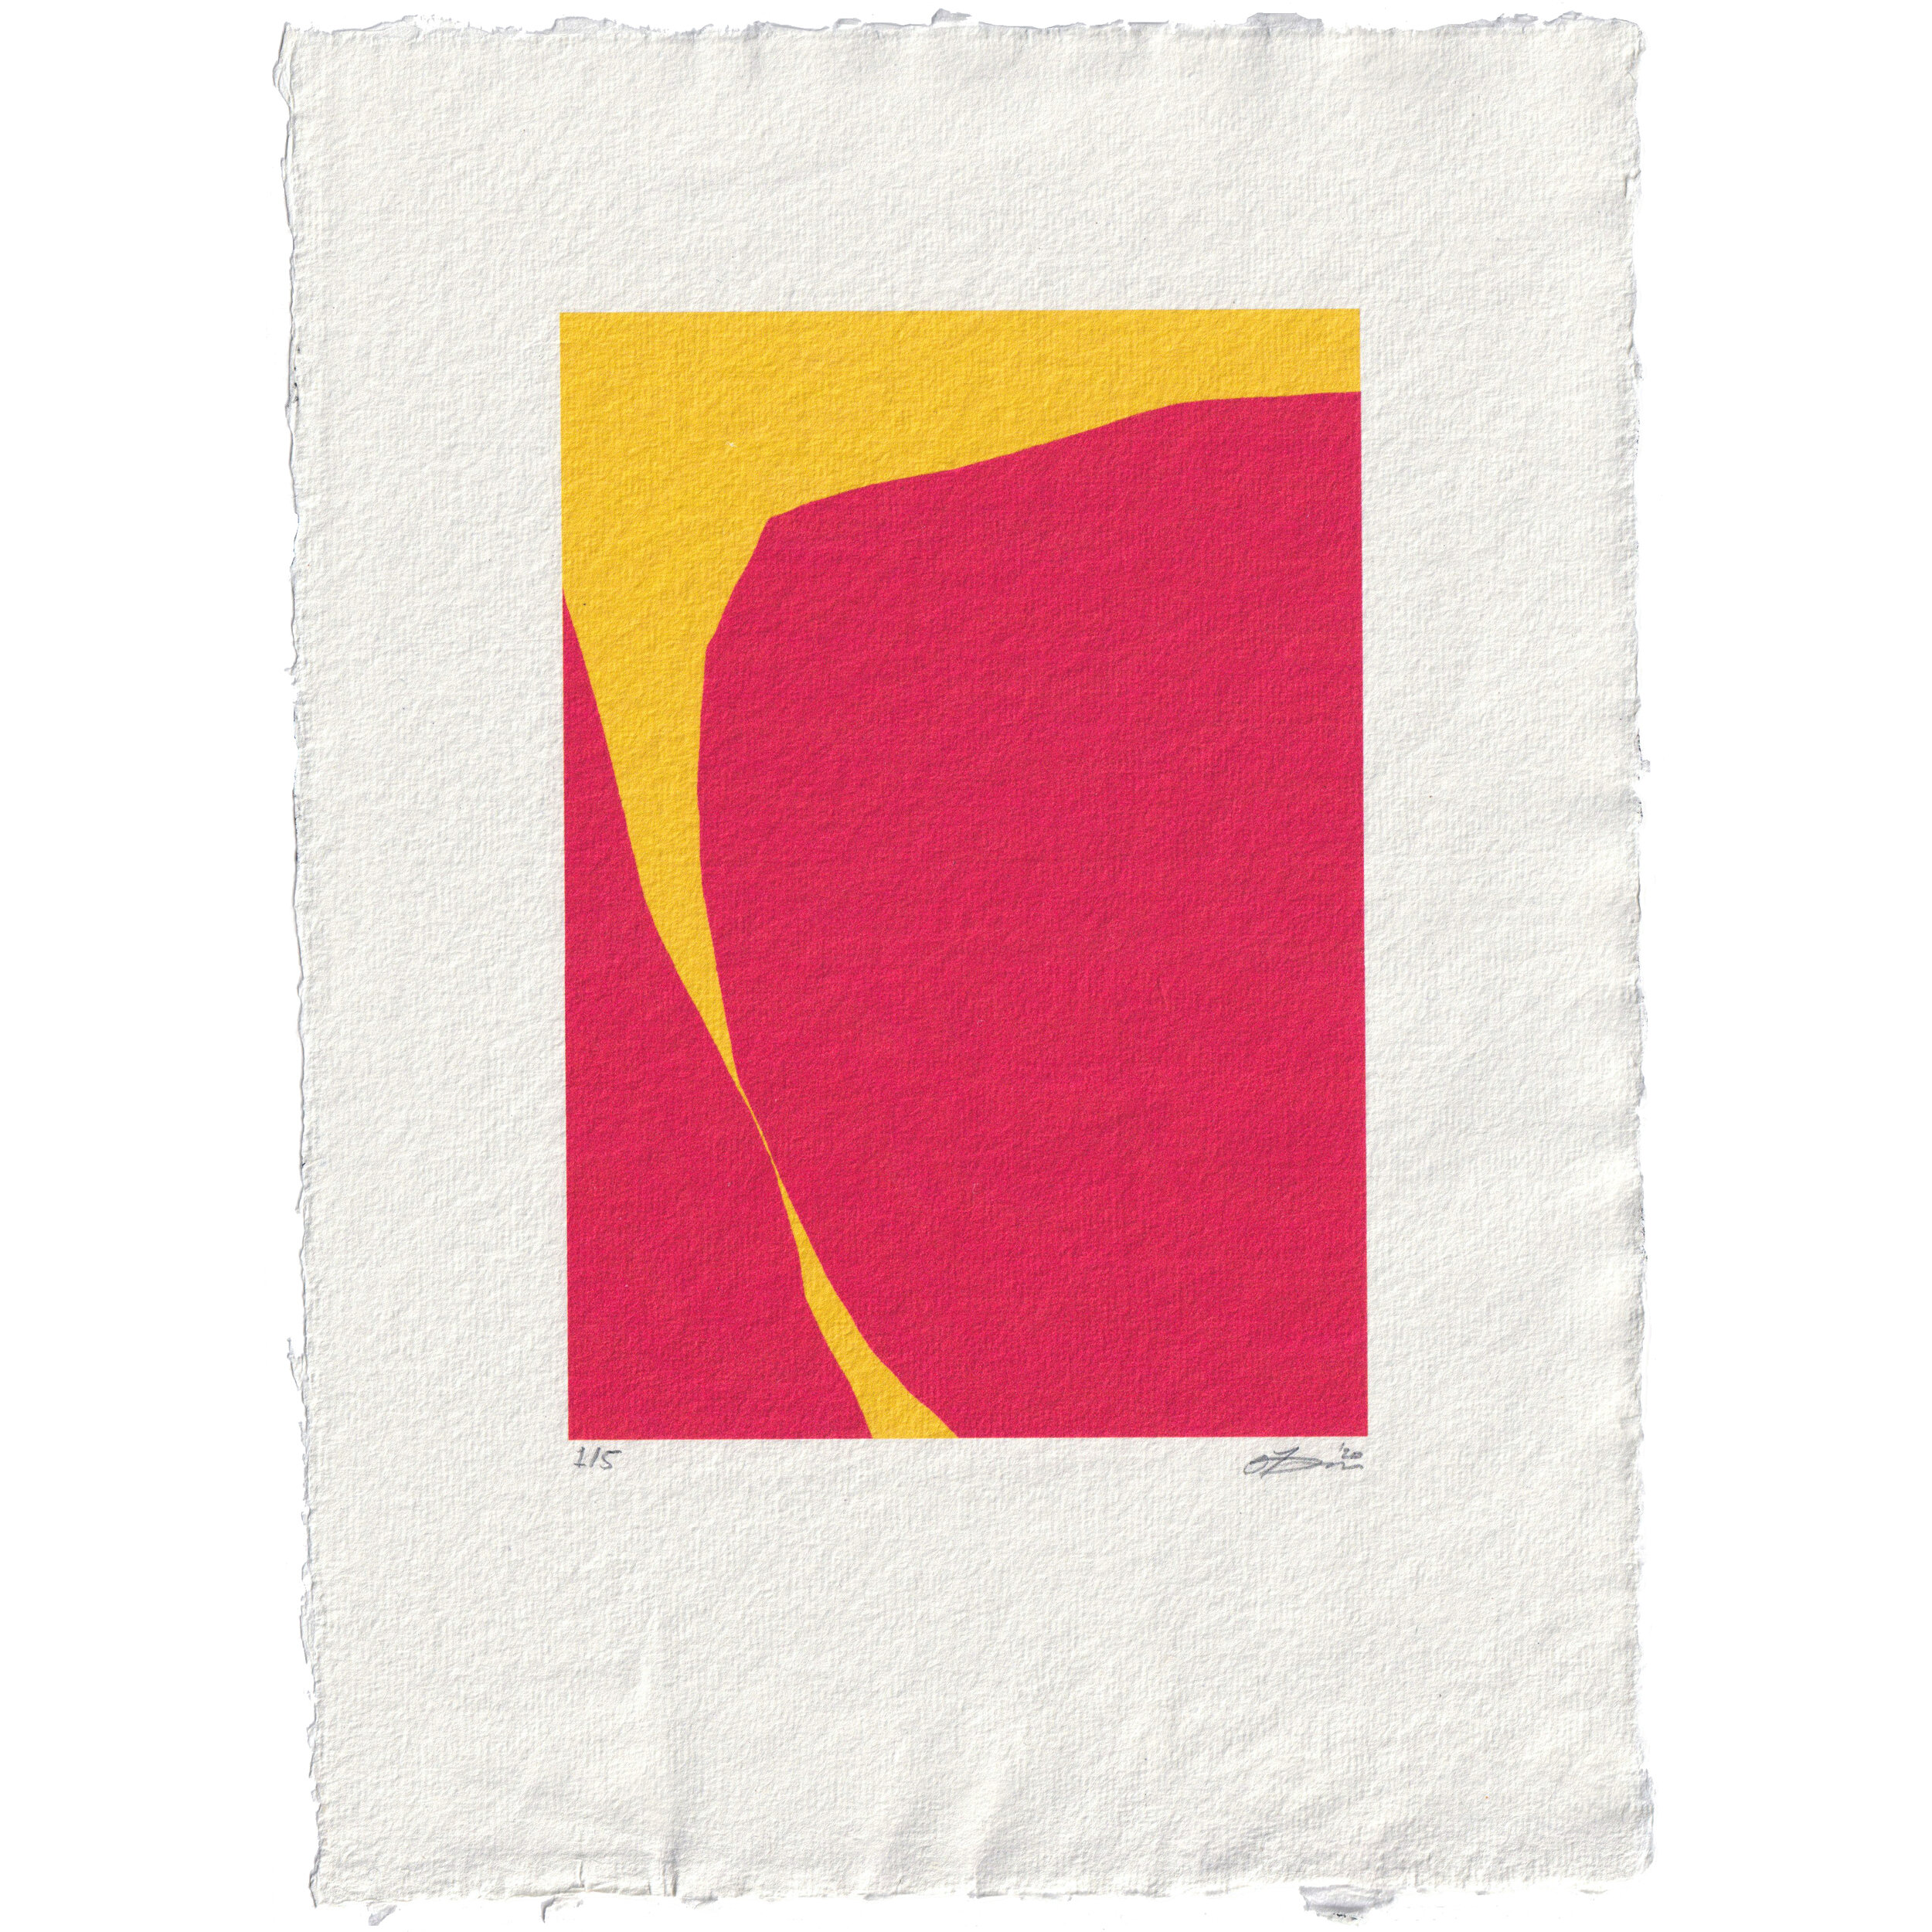 Untitled (Red & Yellow)